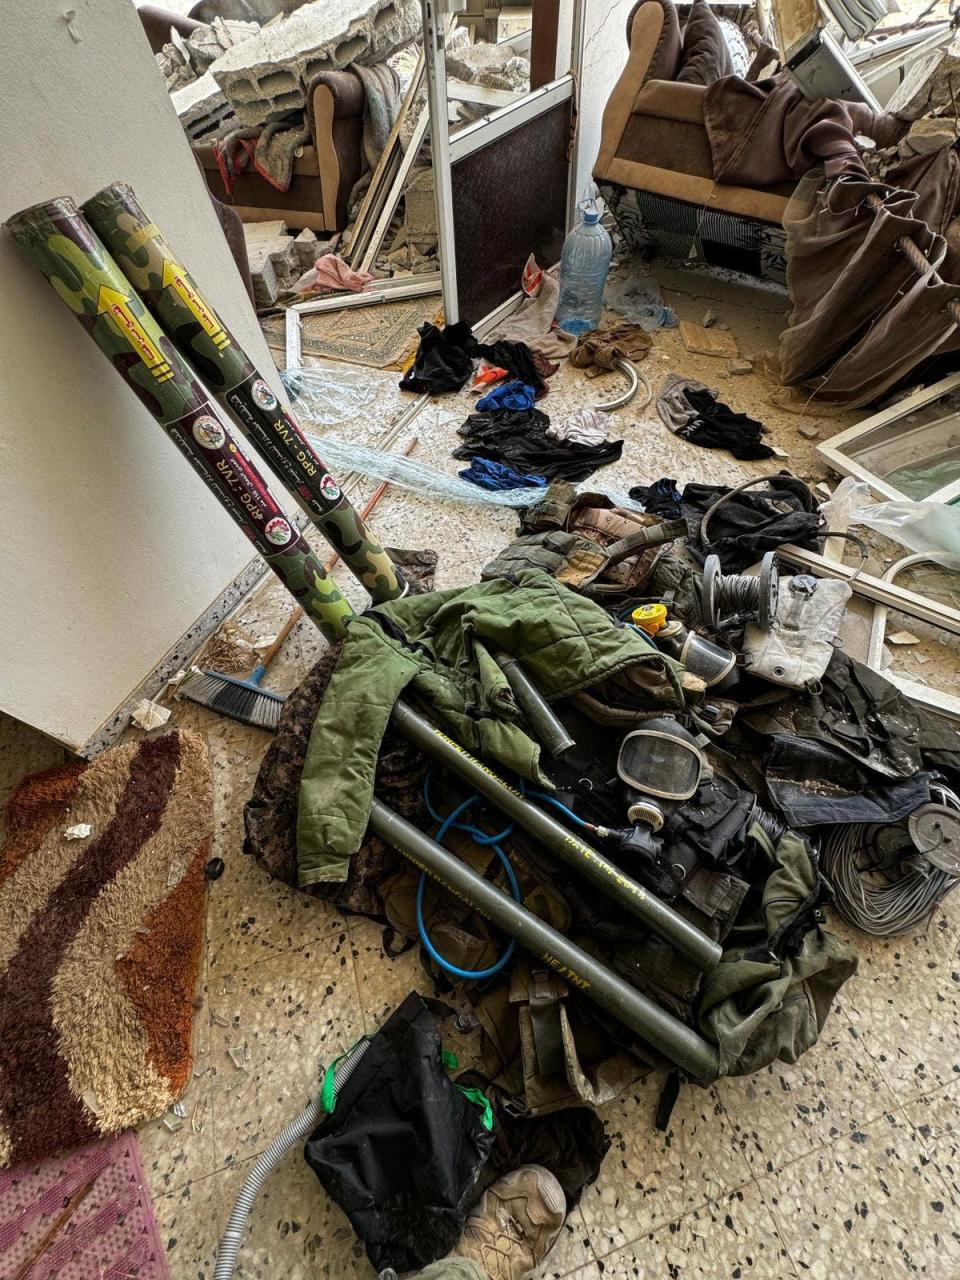 Israeli forces conducted a raid against a Hamas compound in Gaza on Tuesday, uncovering a tunnel and a significant cache of weapons and explosives.